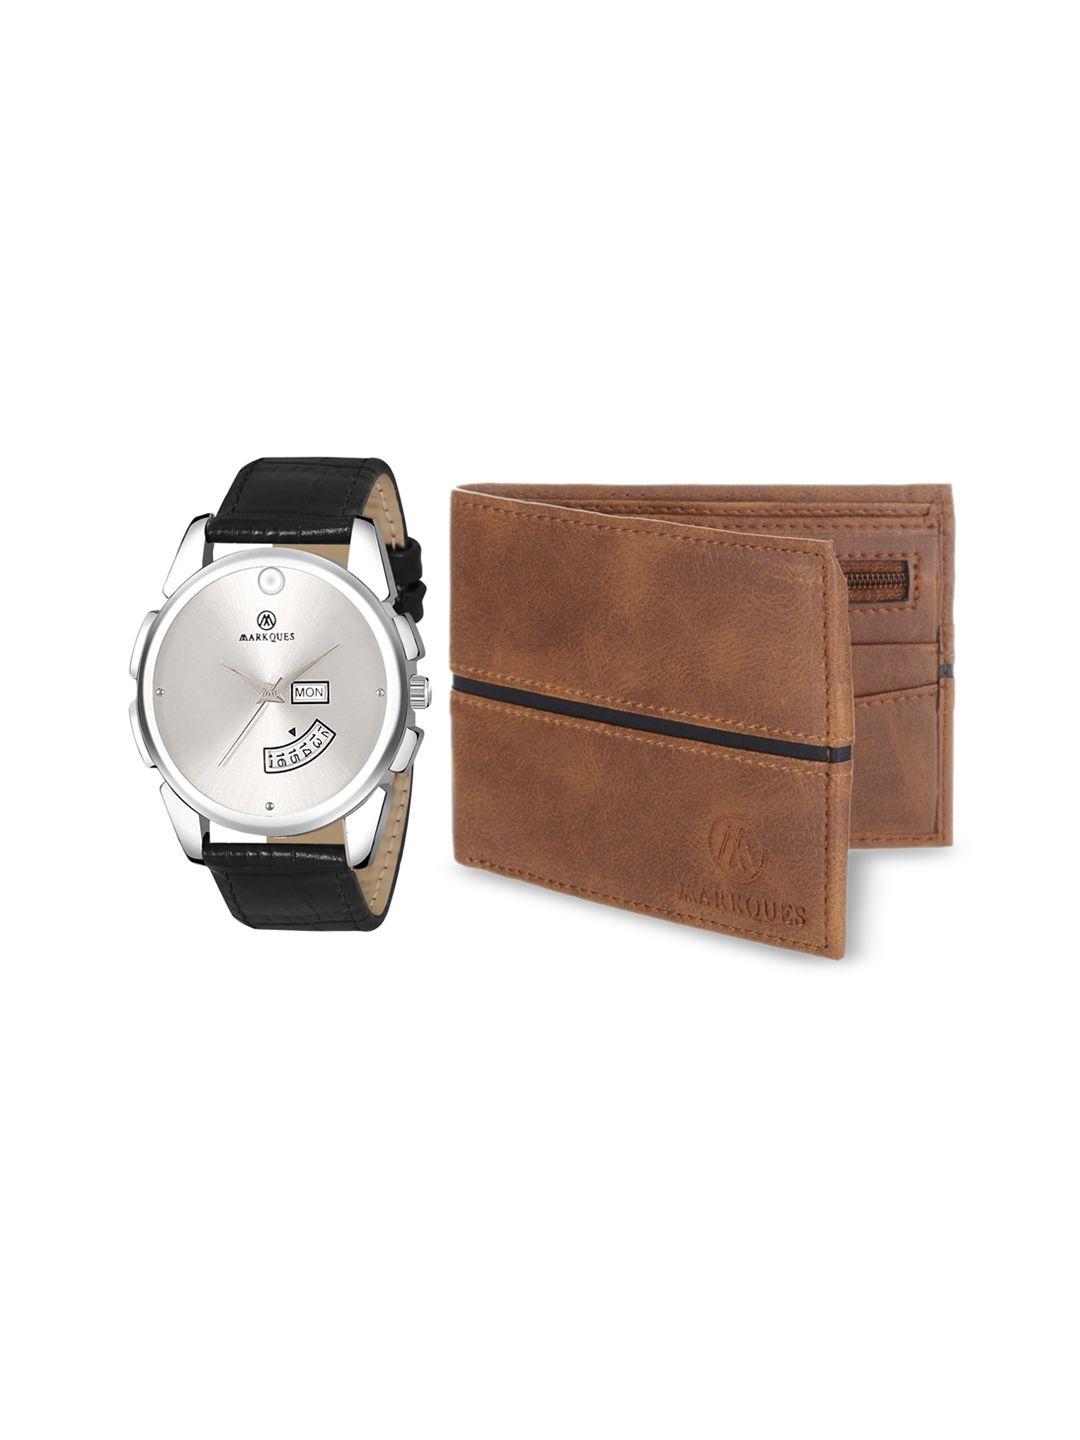 markques men brown leather accessory gift set